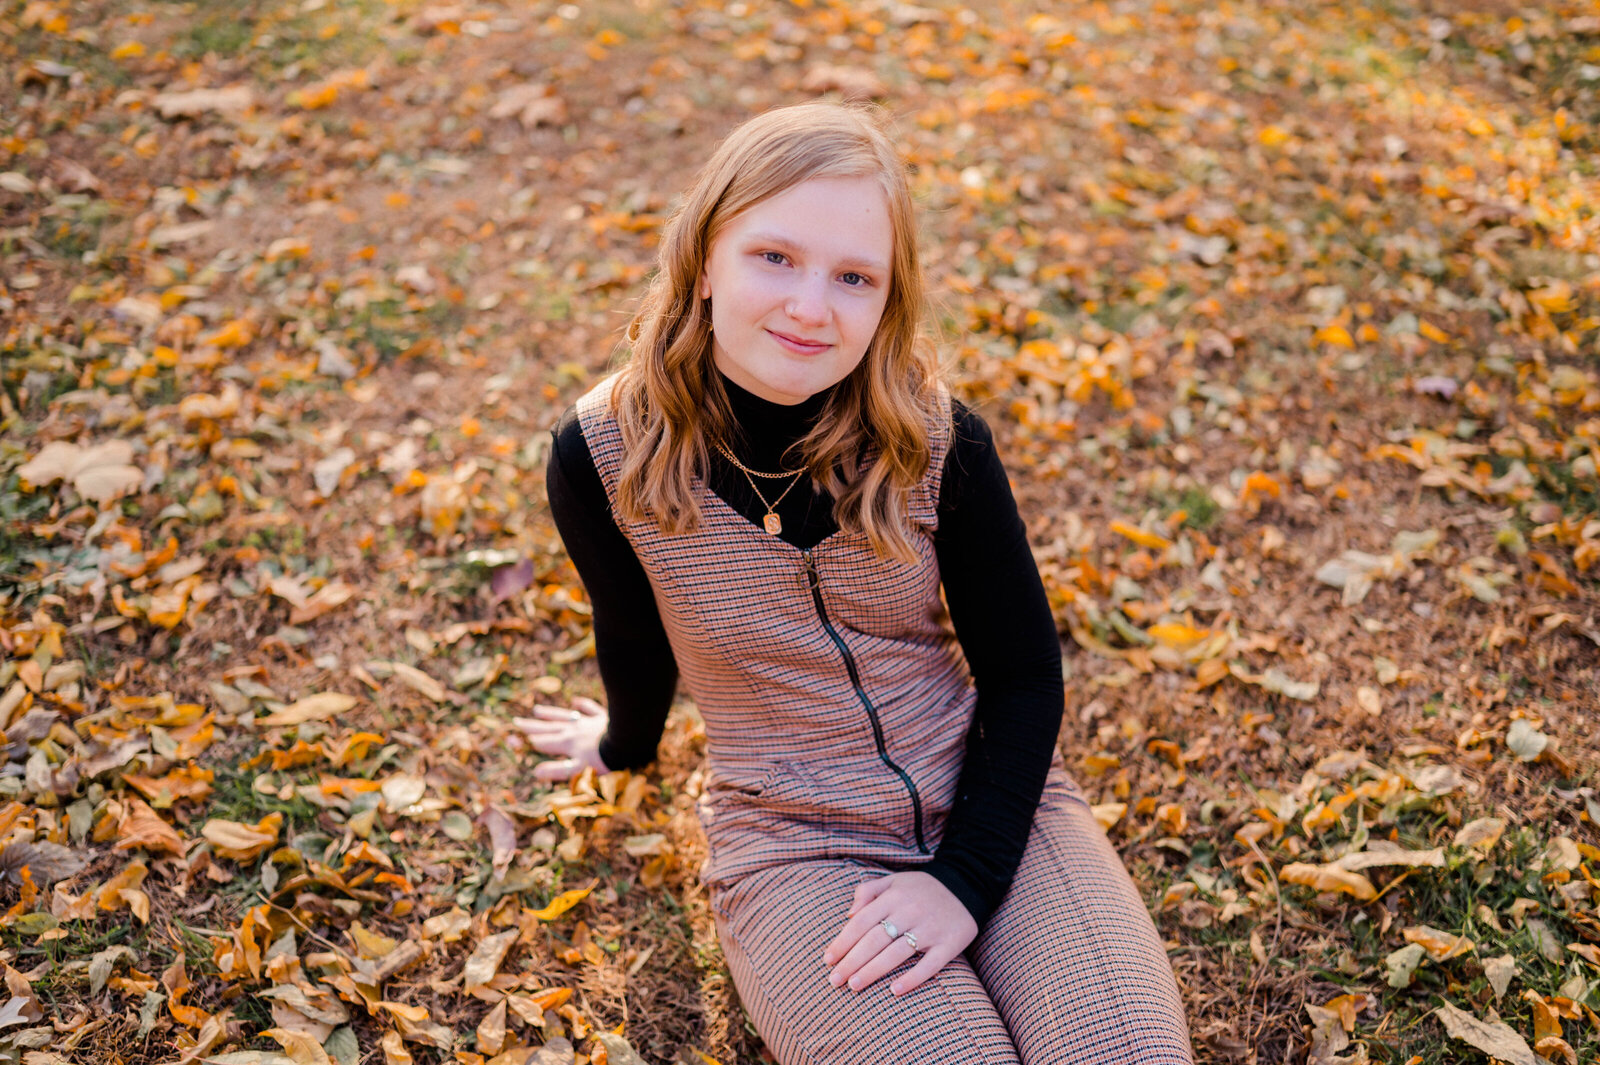 Teenage girl poses for the camera sitting on fallen autumn leaves.